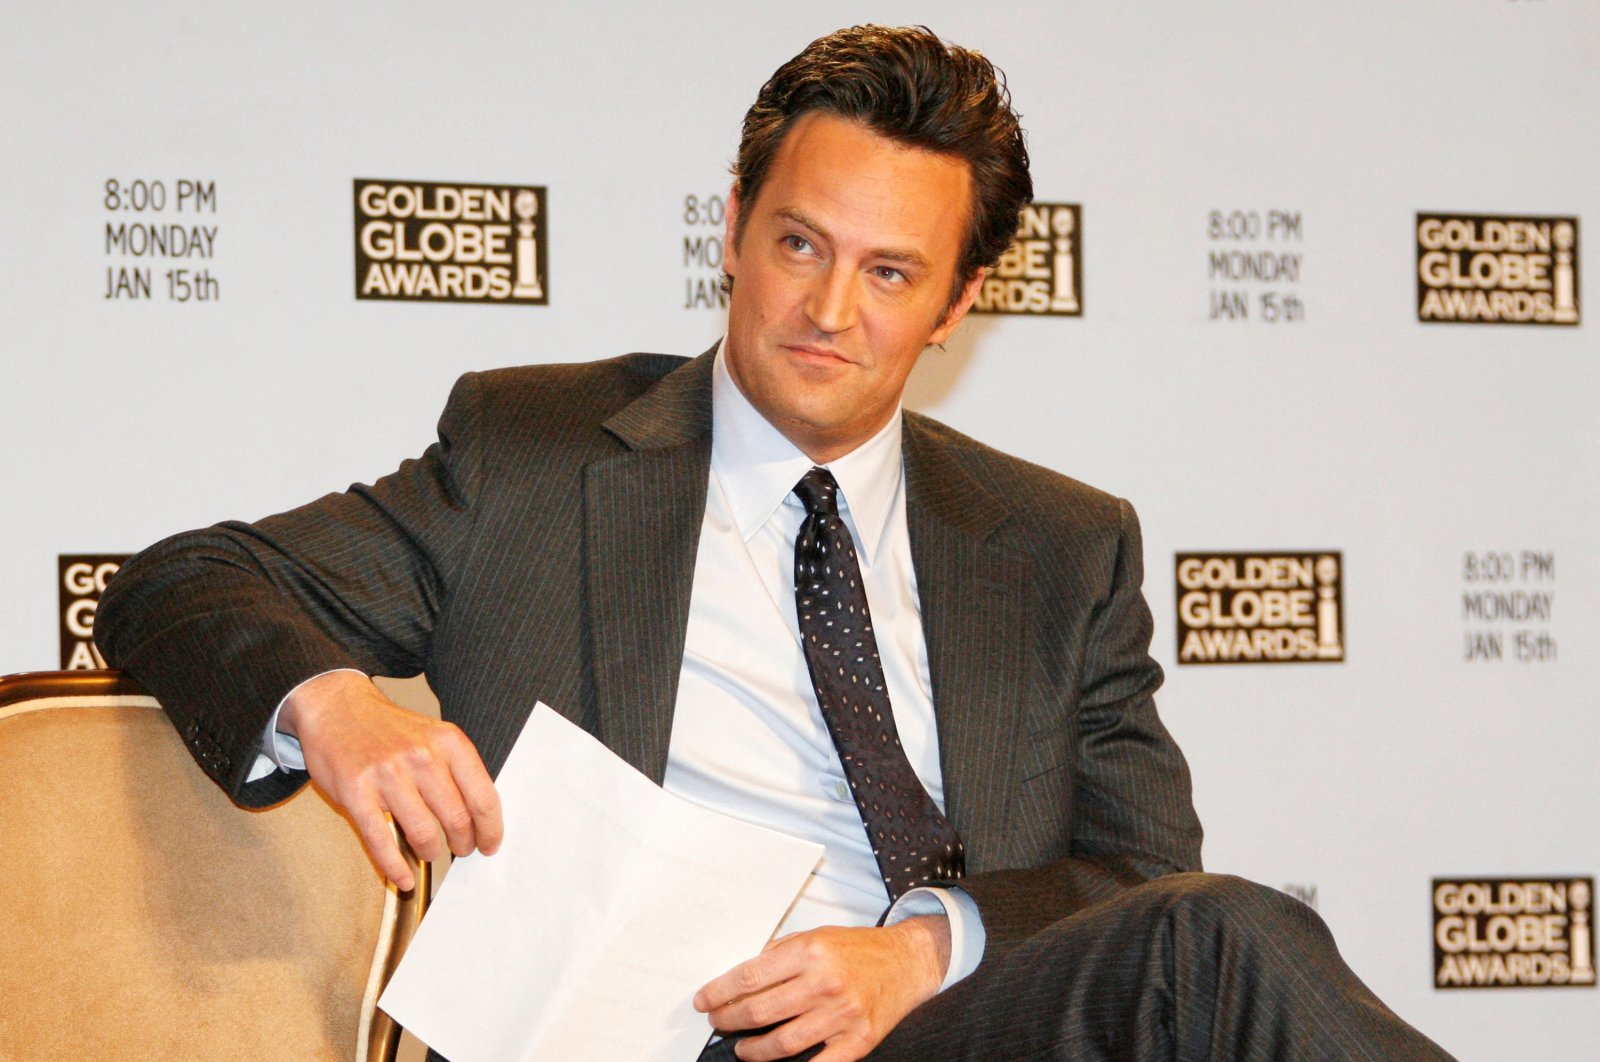 Actor Matthew Perry waits to announce the nominations for the Golden Globe Awards during a news conference in Beverly Hills, California, U.S., Dec. 14, 2006. (Reuters Photo)